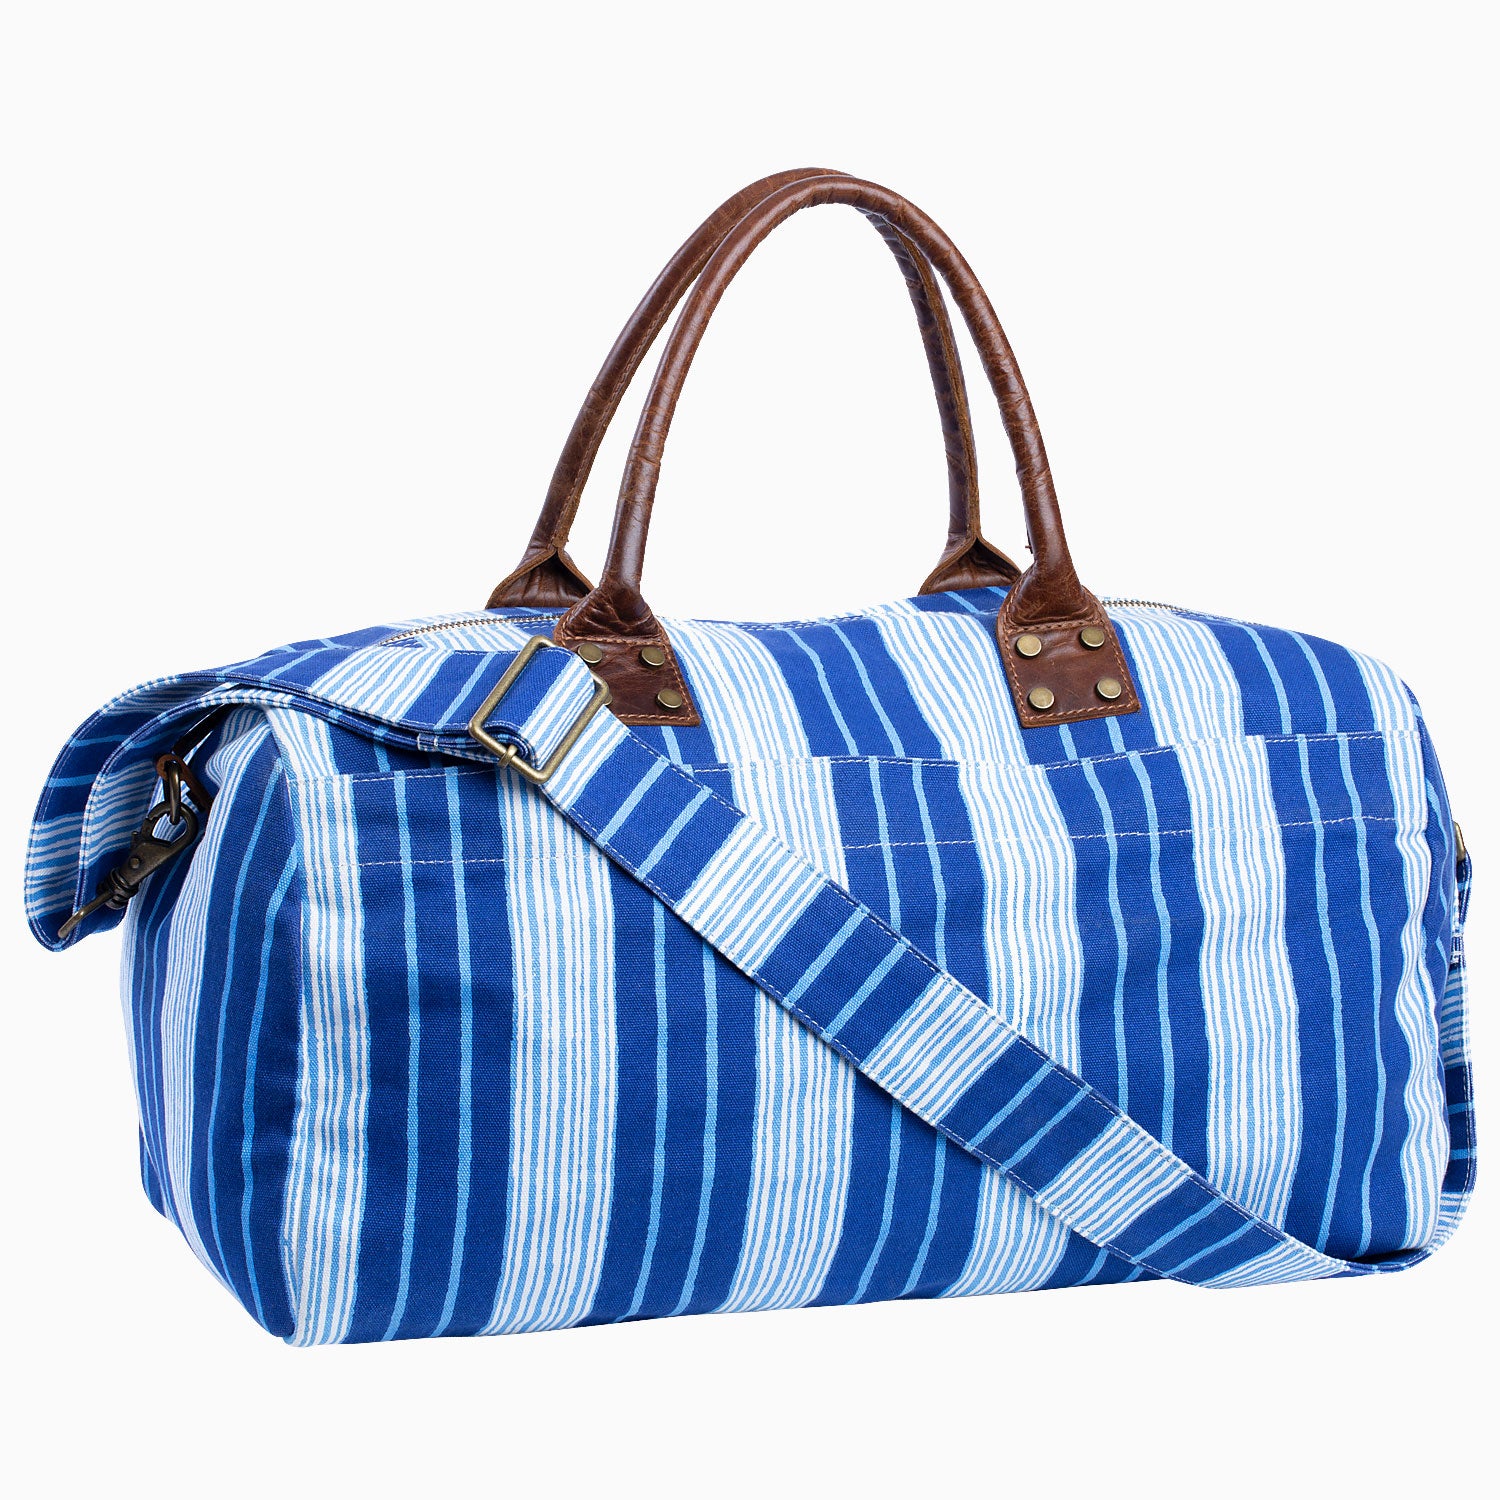 Weekend bag in Bold Striped by O-Project · Atelier Solarshop